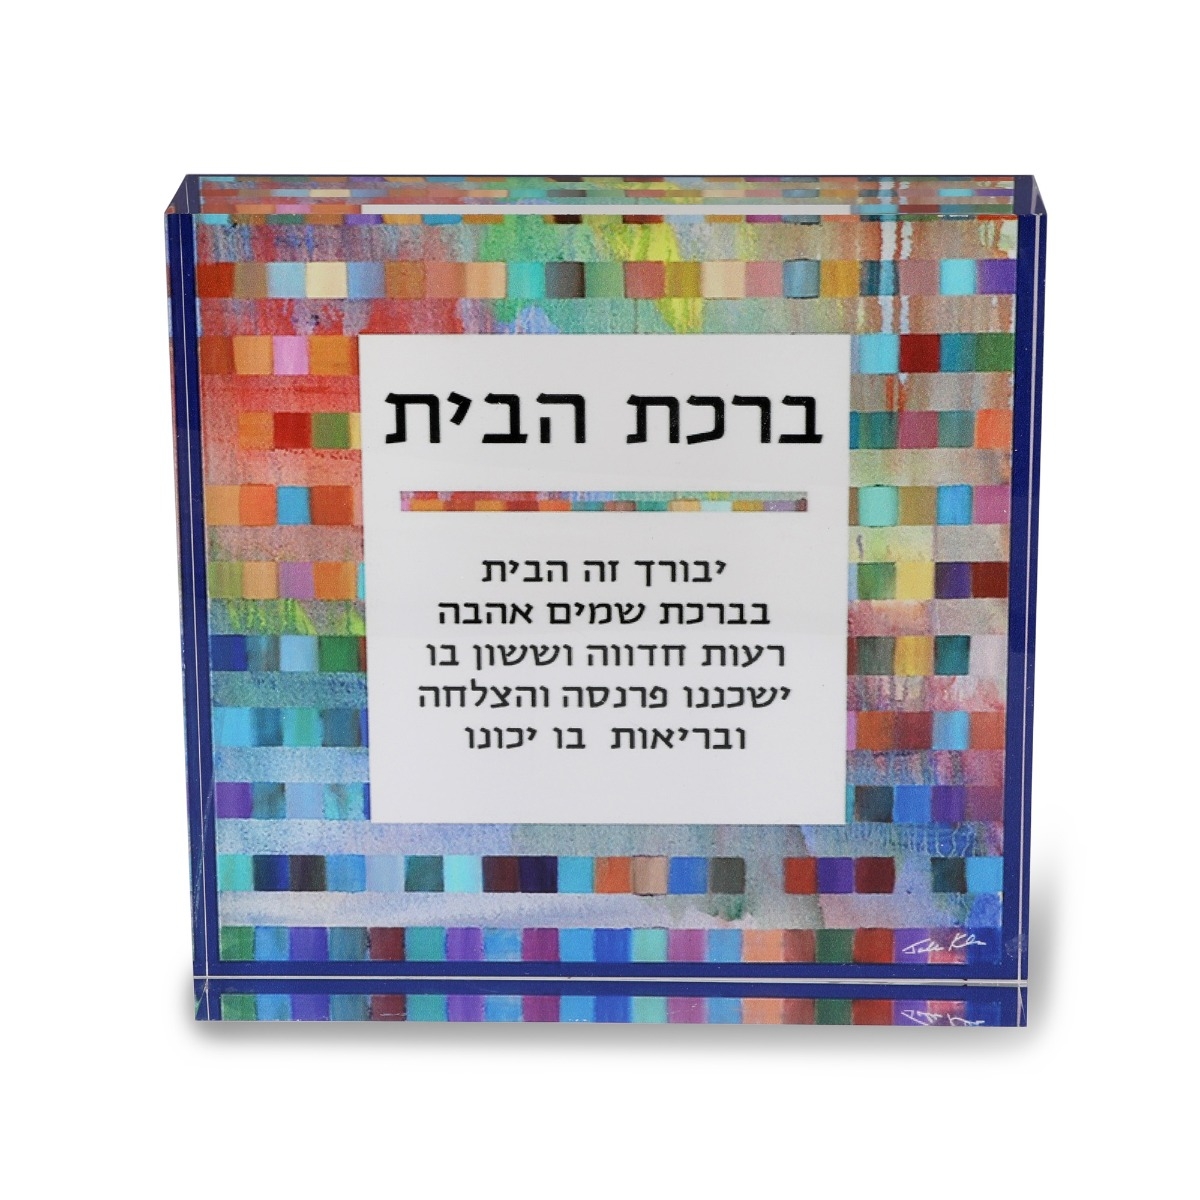 Jordana Klein Home Blessing Glassy Cube With Colorful Abstract Design (Hebrew) - 1